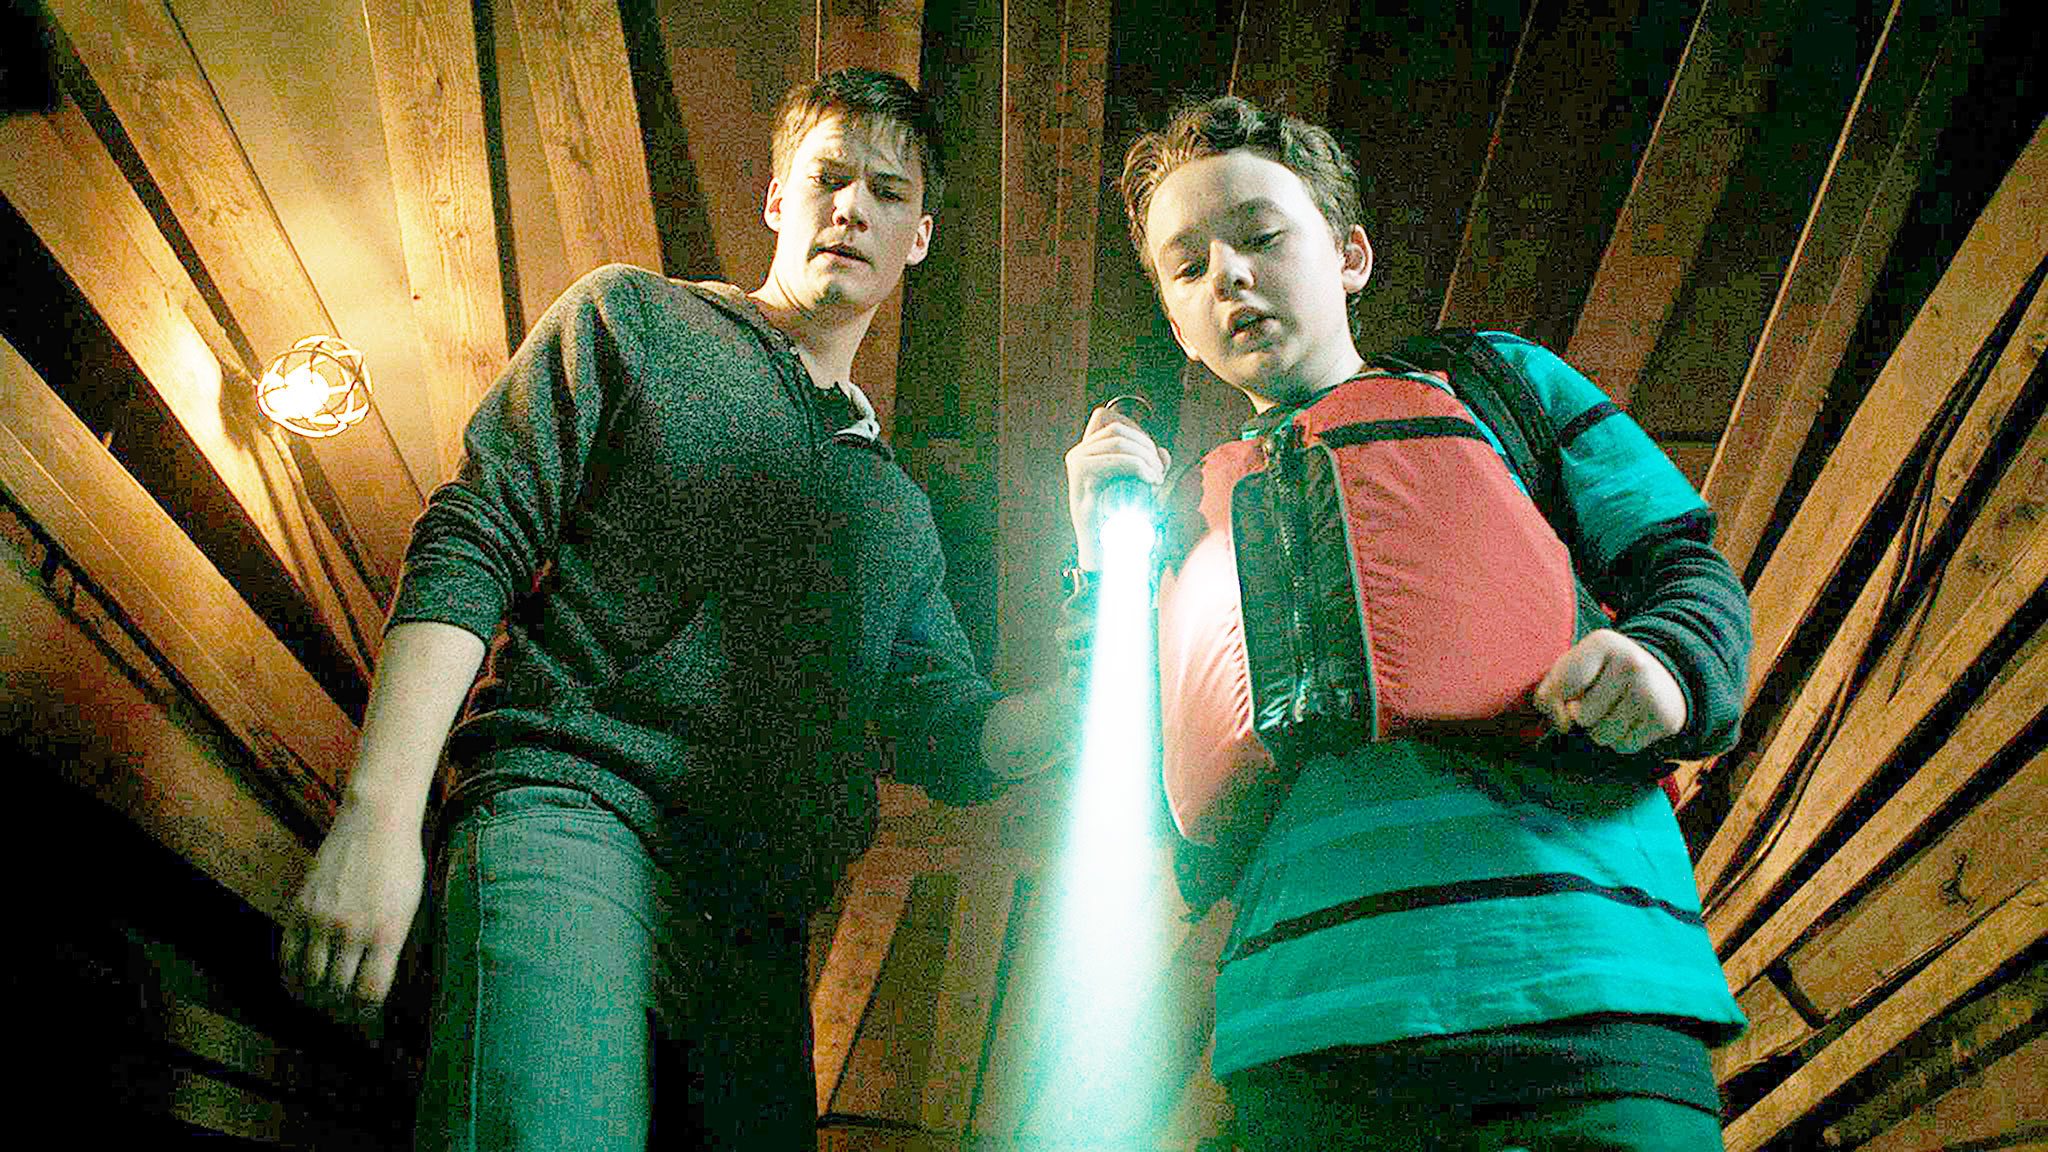 Justin Kelly, left, and Benjamin Stockham play brothers in pursuit of a lost family fortune on a remote island in the independent film “Lost & Found,” written, produced and directed by South Whidbey High School graduate Joseph Itaya. Before its widespead release, the movie will be shown at The Clyde in Langley on Dec. 27. Photo provided by Lost & Found